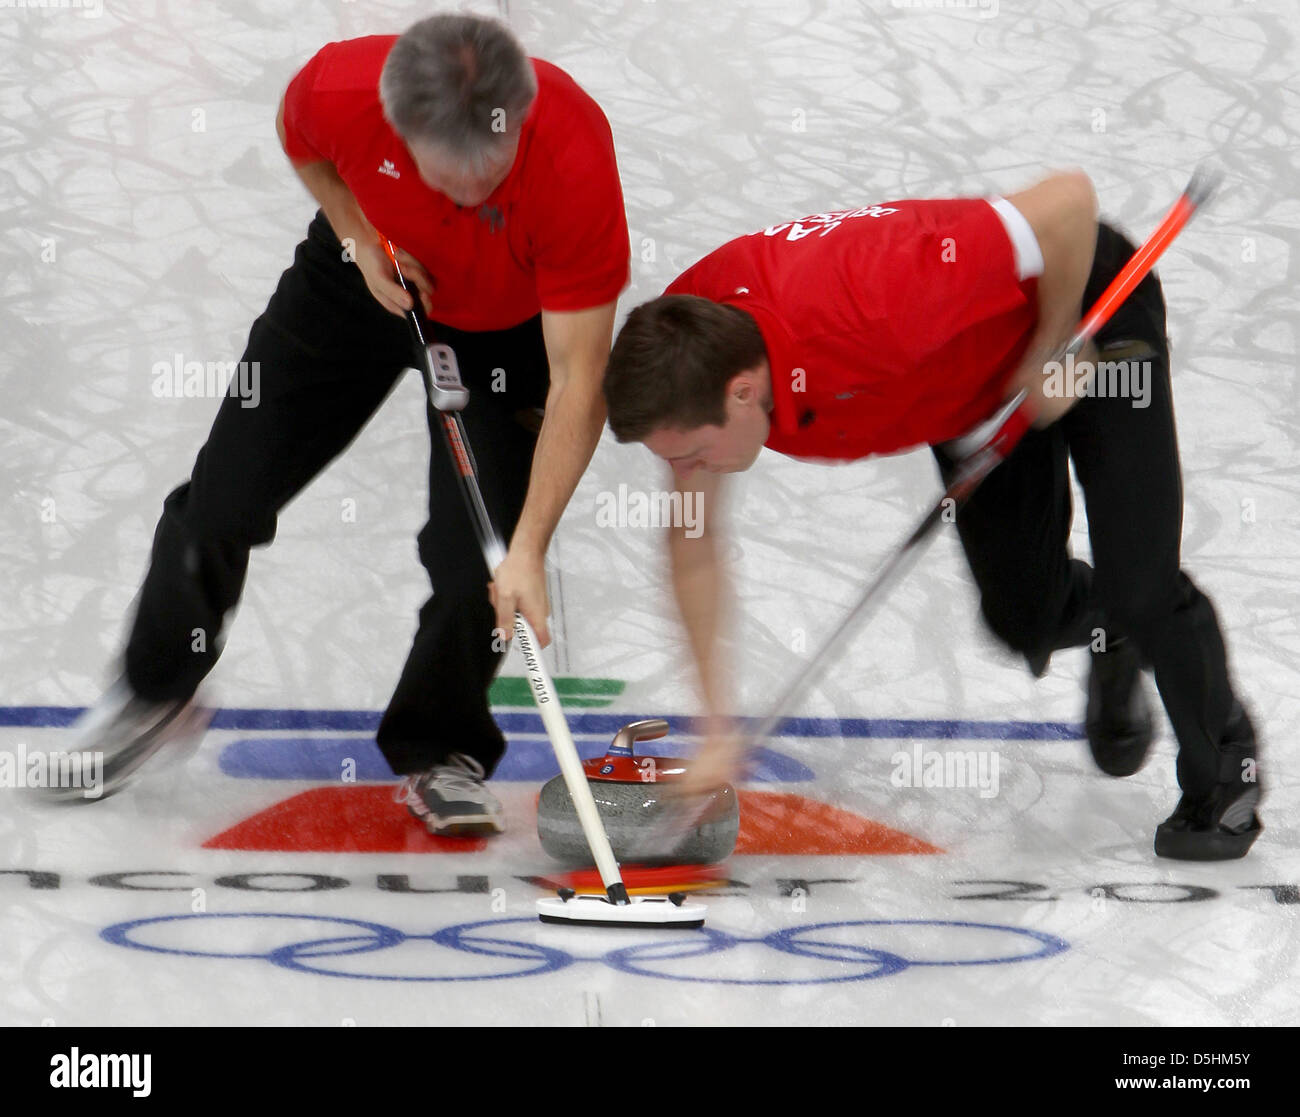 Andy Lang (L) of Germany and teammate Holger Hoehne sweep the ice to guide the stone during their curling men's round robin session 4 against Norway during the Vancouver 2010 Olympic Games at the Vancouver Olympic Center in Vancouver, Canada 18 February 2010. Photo: Daniel Karmann  +++(c) dpa - Bildfunk+++ Stock Photo